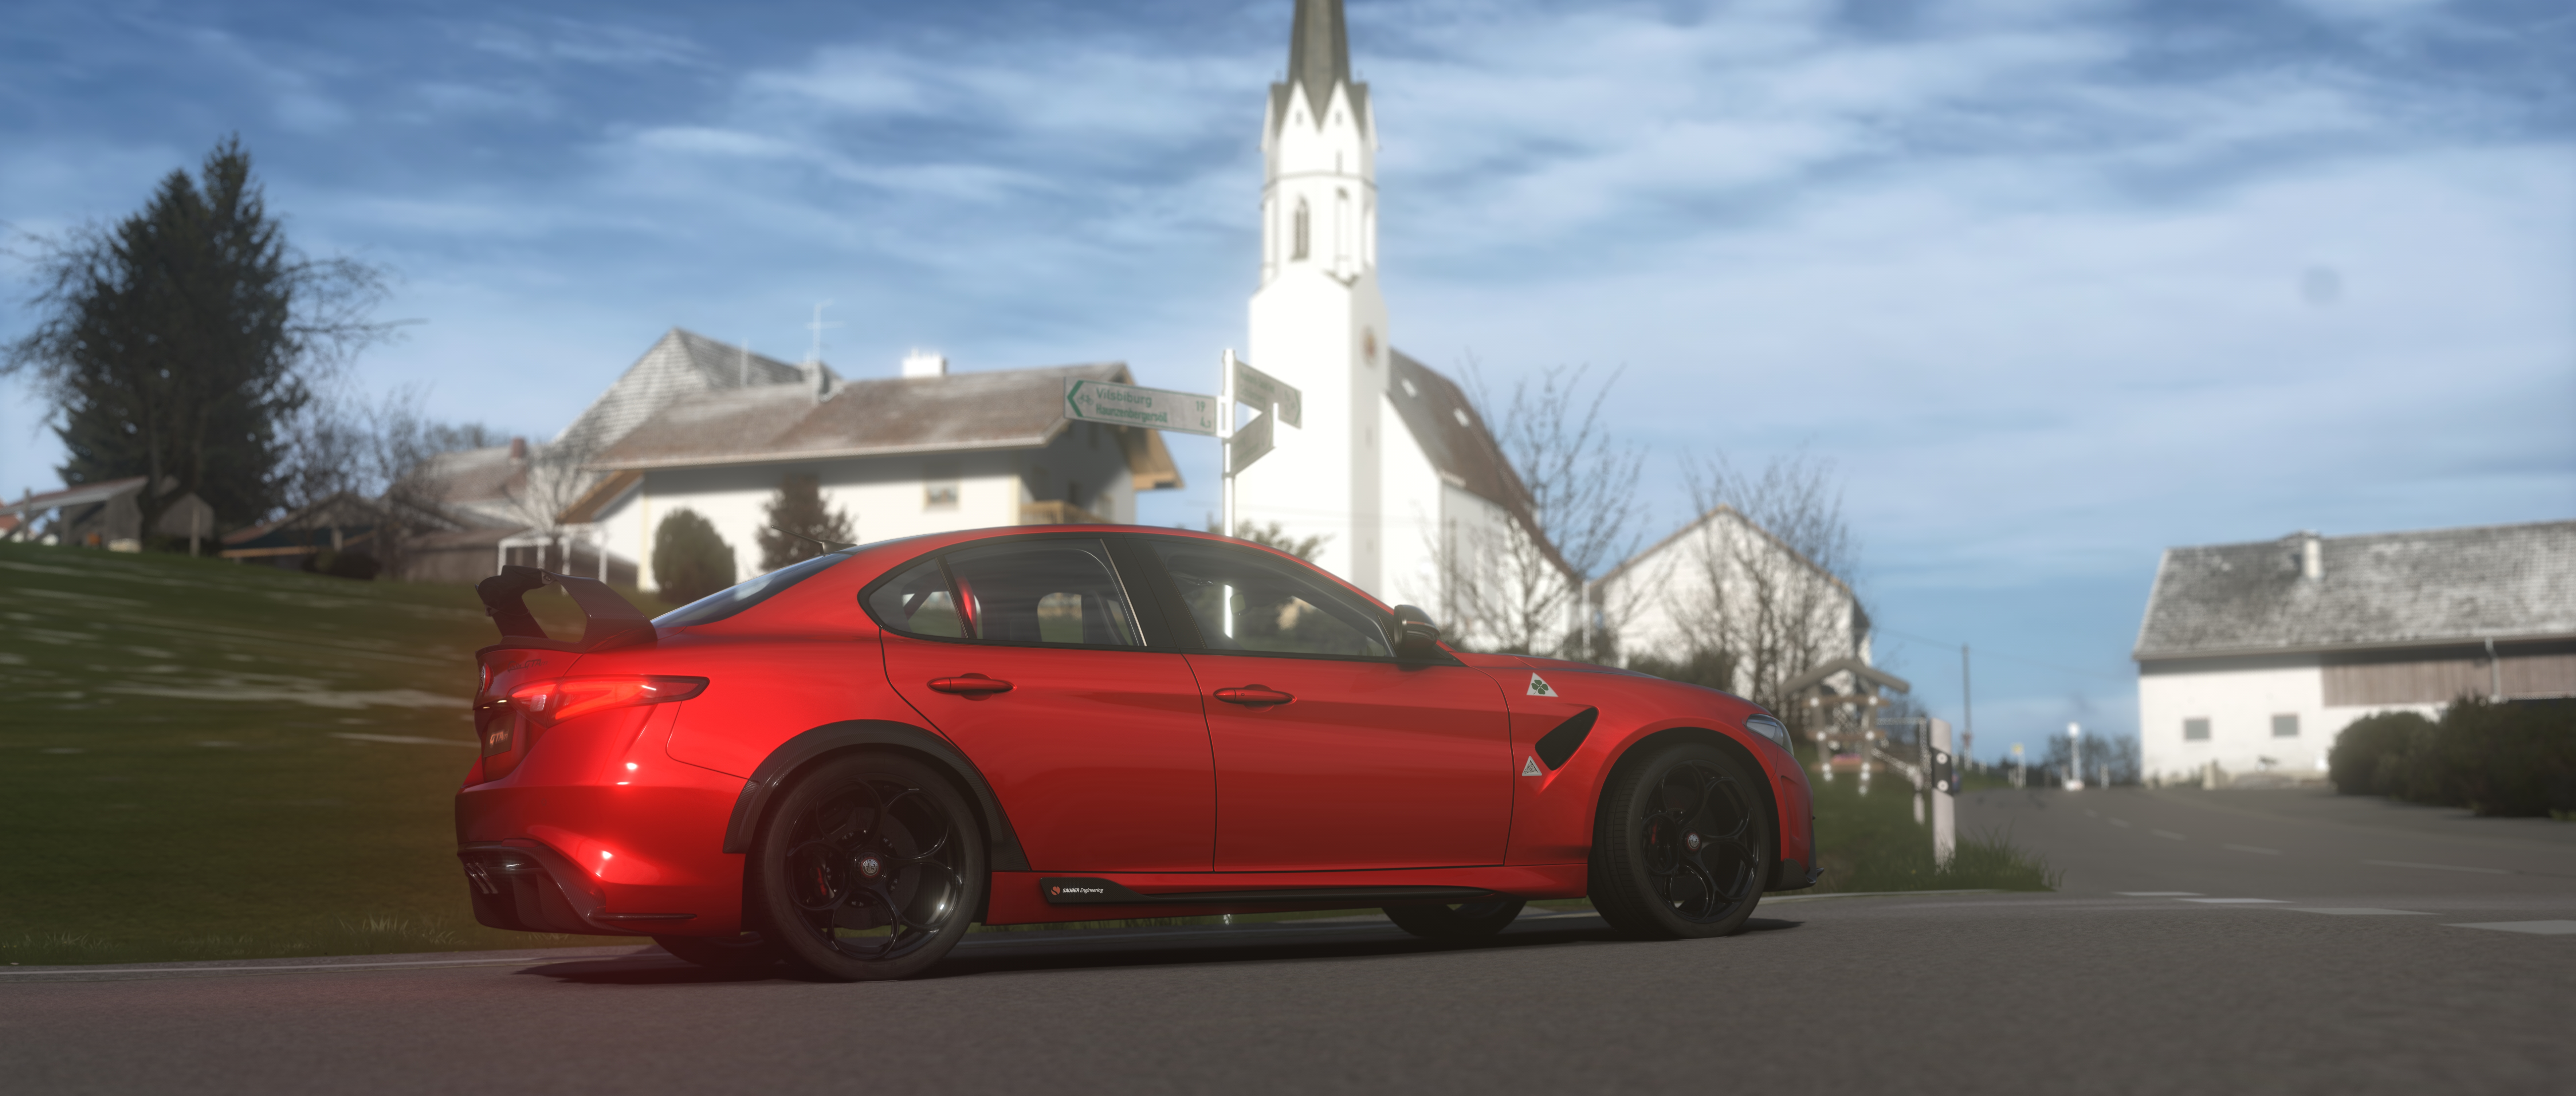 General 7680x3269 Alfa Romeo car Assetto Corsa PC gaming video game art vehicle video games side view red cars taillights sky clouds CGI building trees sign